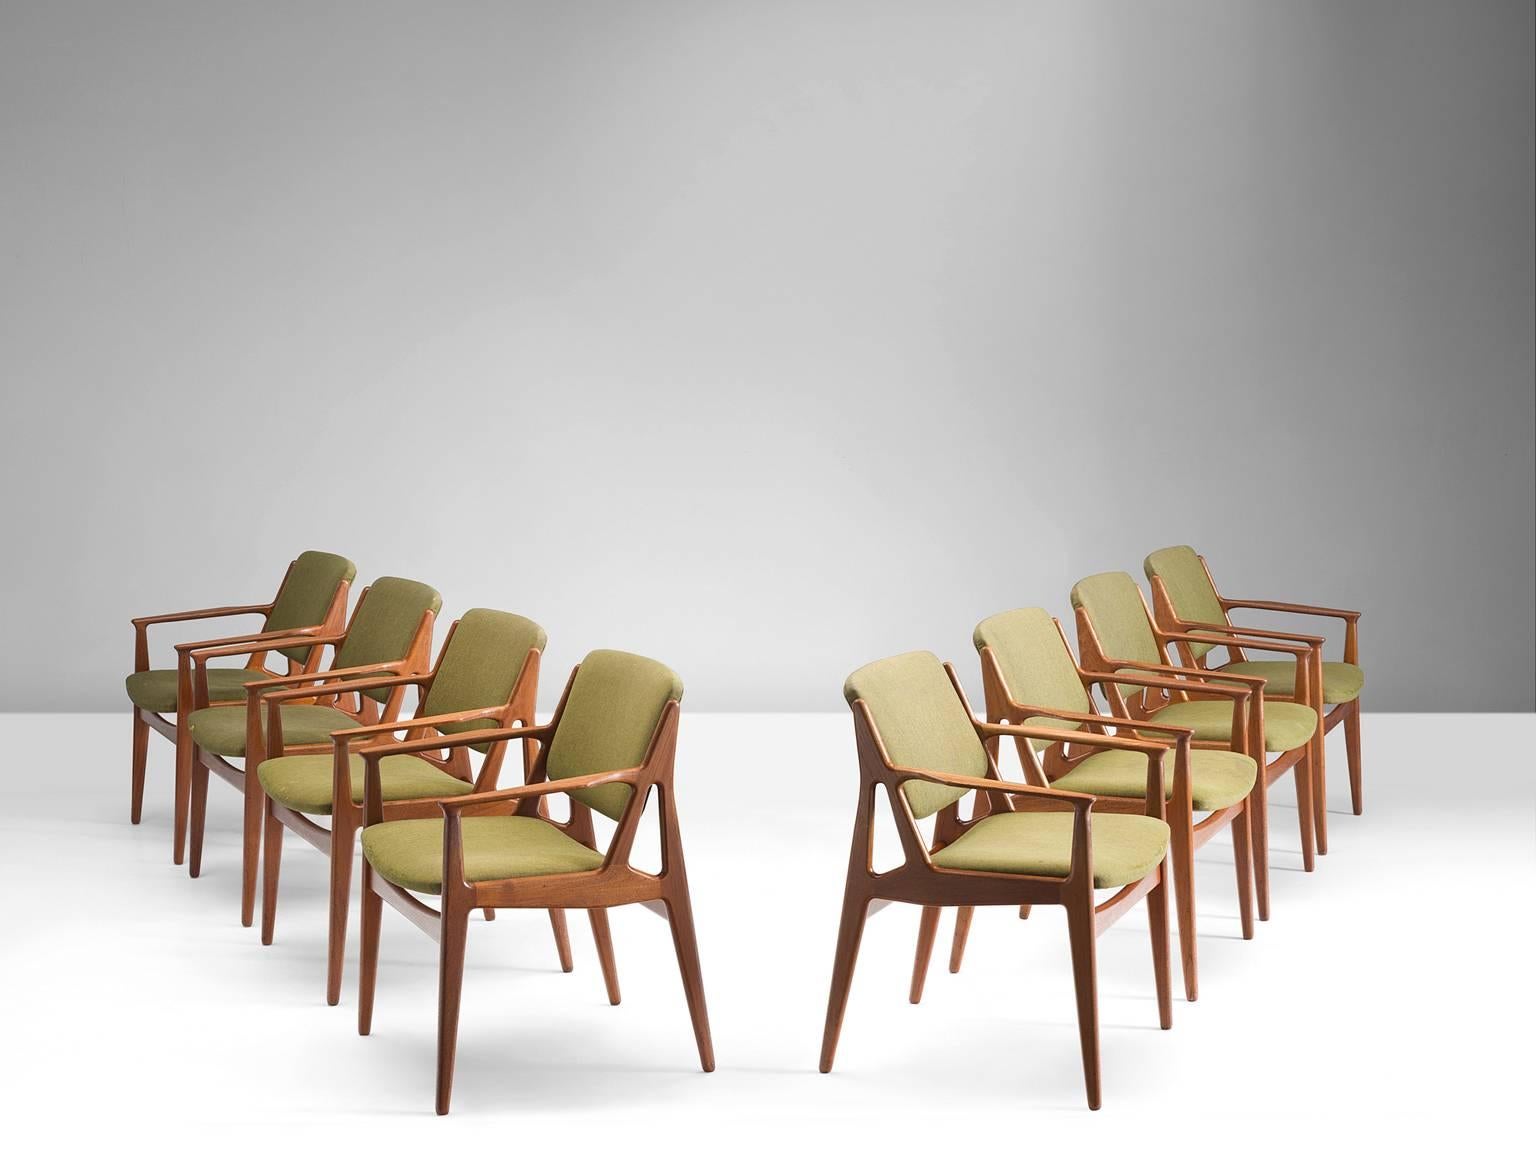 Eight dining chairs, teak and fabric designed by Arne Vodder for Vamo Sonderborg, Denmark, 1960s.

These sensuous armchairs have been restored with olive green fabric upholstery. The sculptural frame is what makes these Danish chairs so unique.